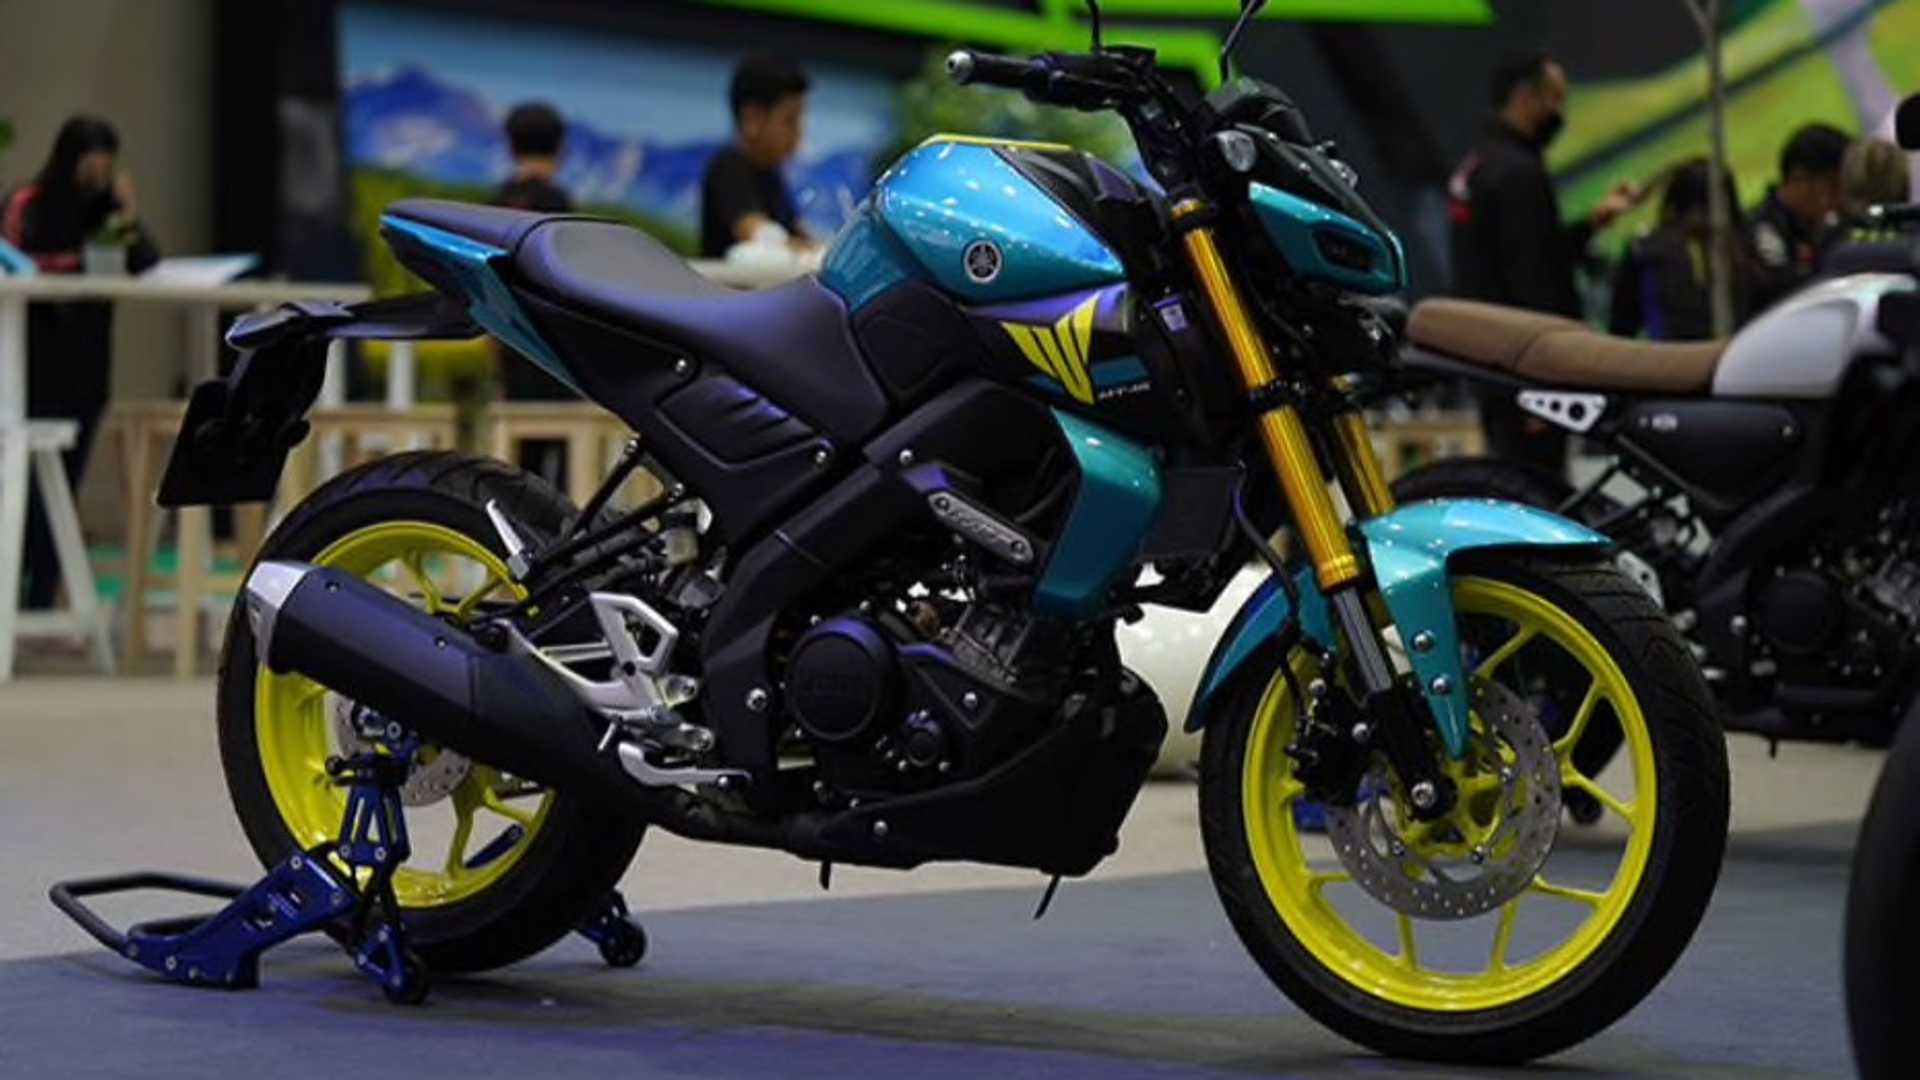 Check Out This Limited Edition Yamaha MT 15 Launched In Thailand